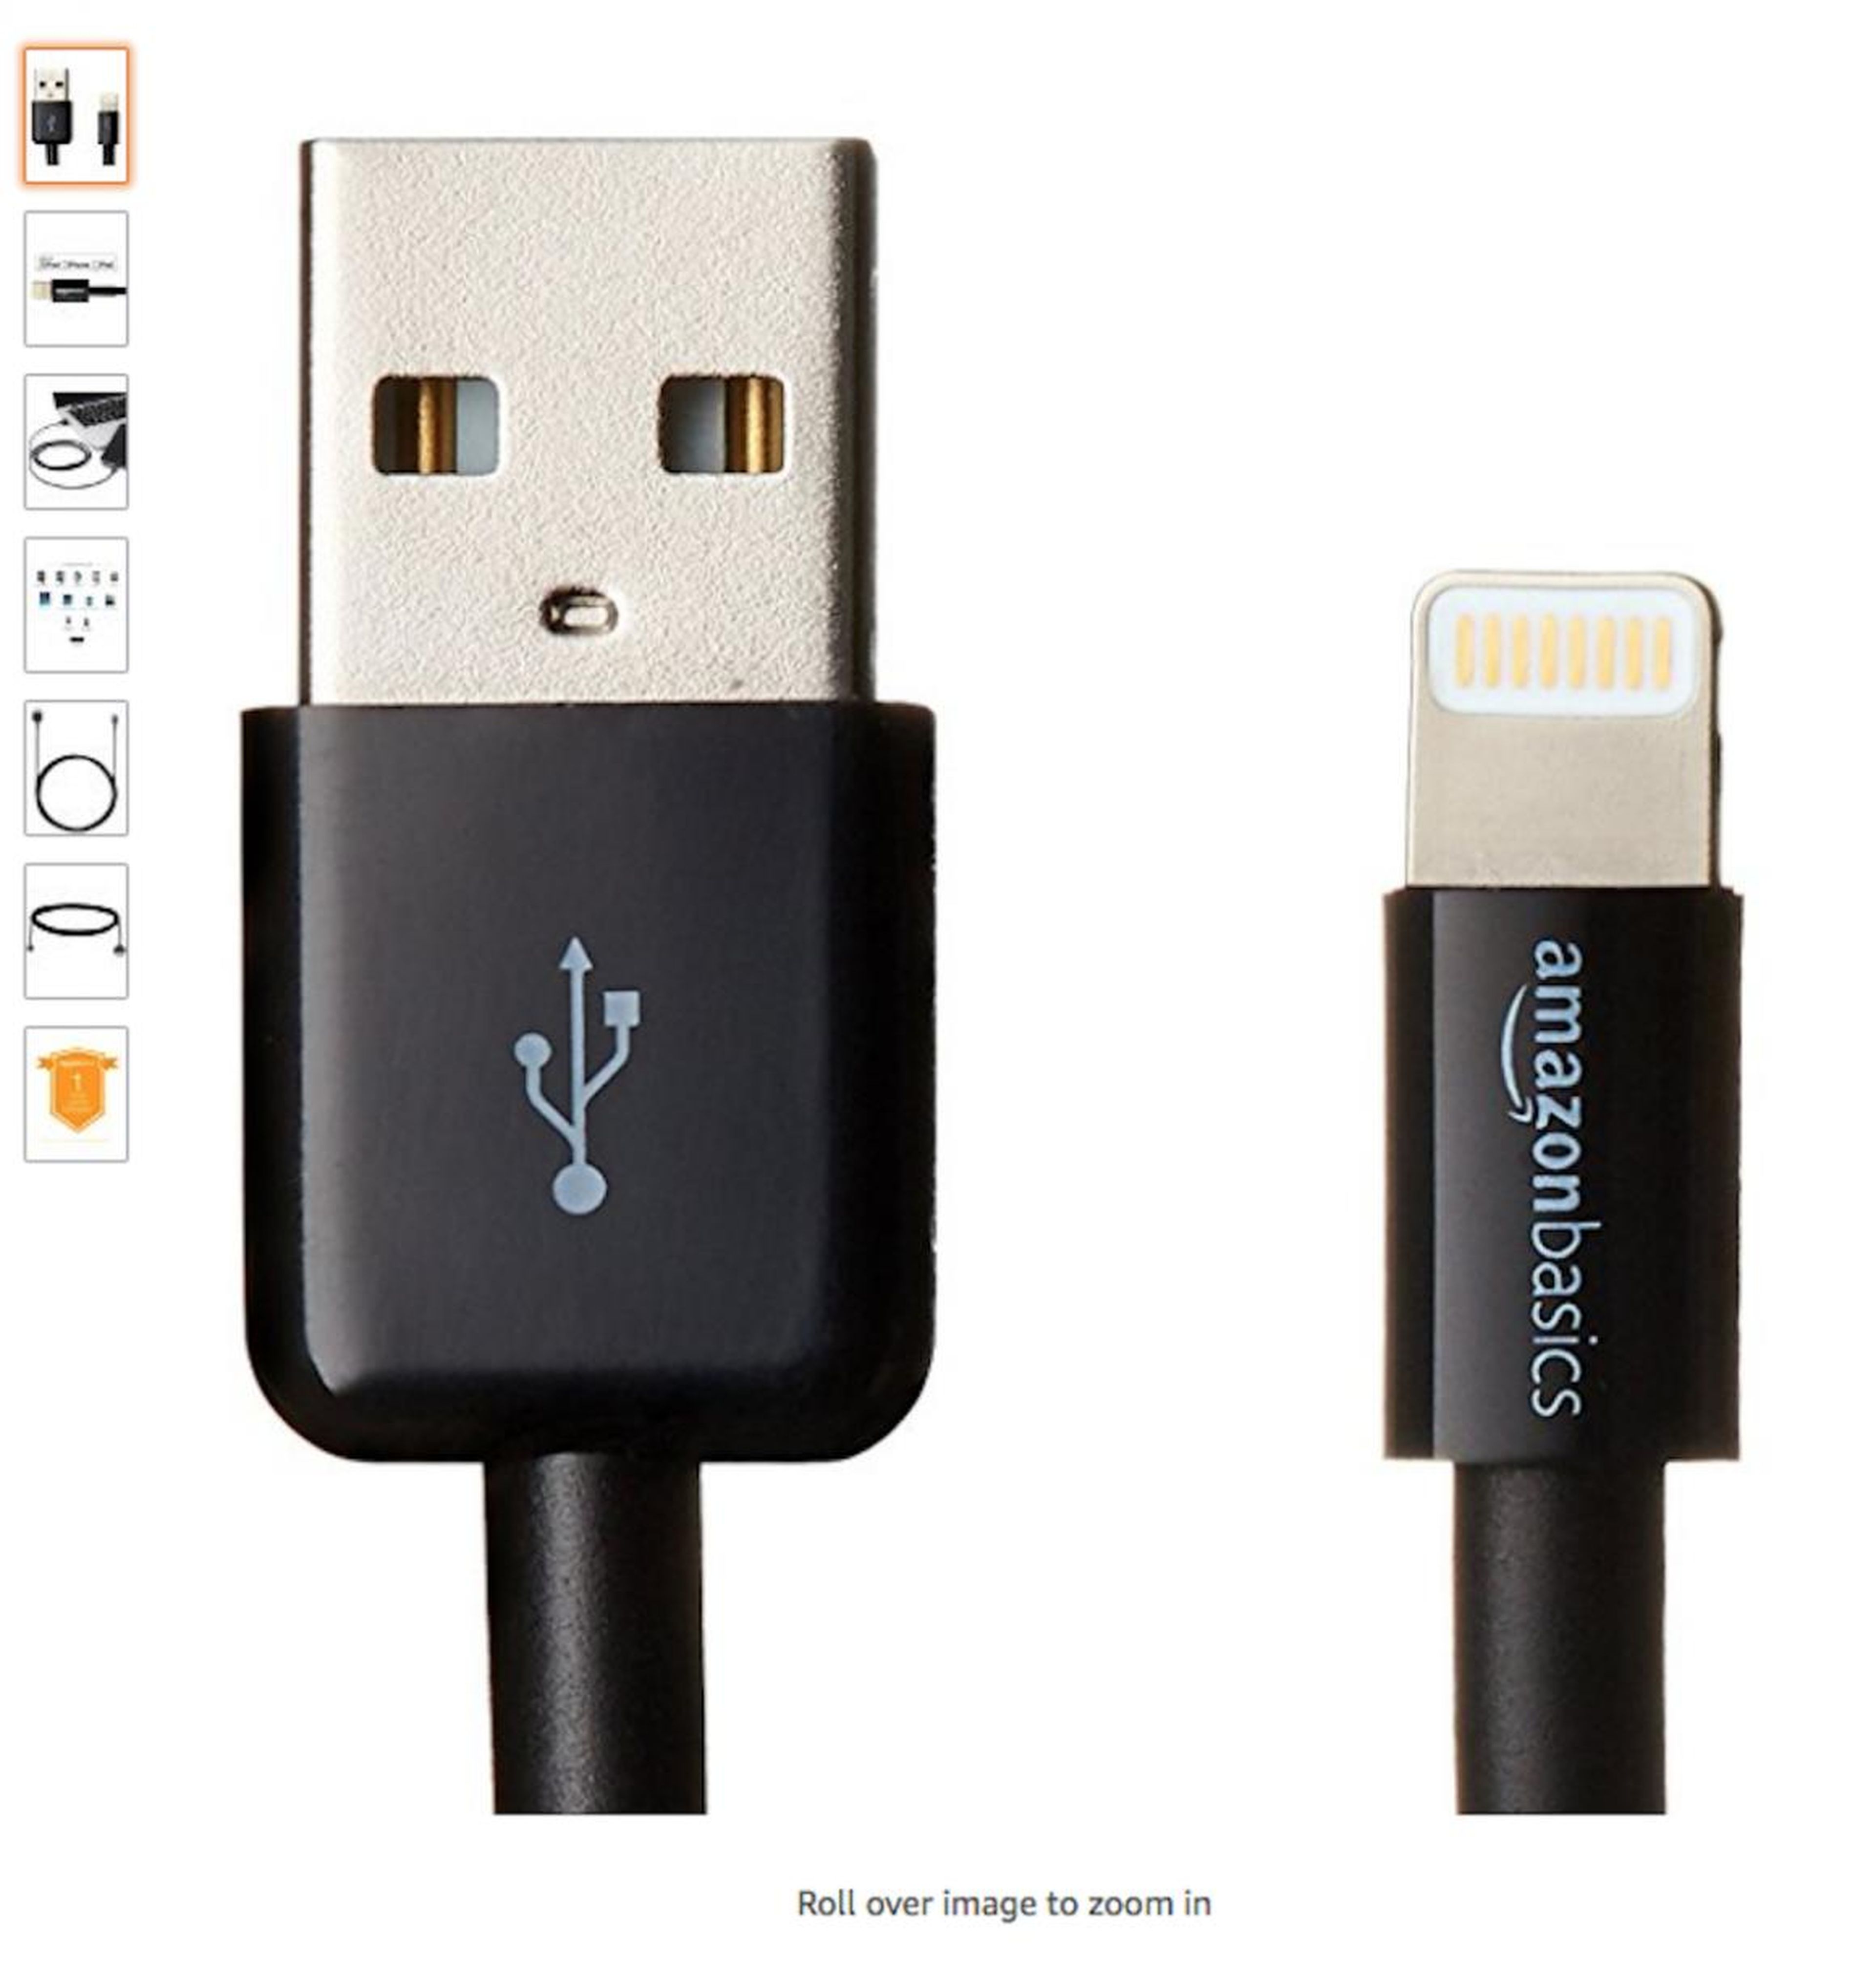 They also bought the Amazon Basics USB Lightning Cable.